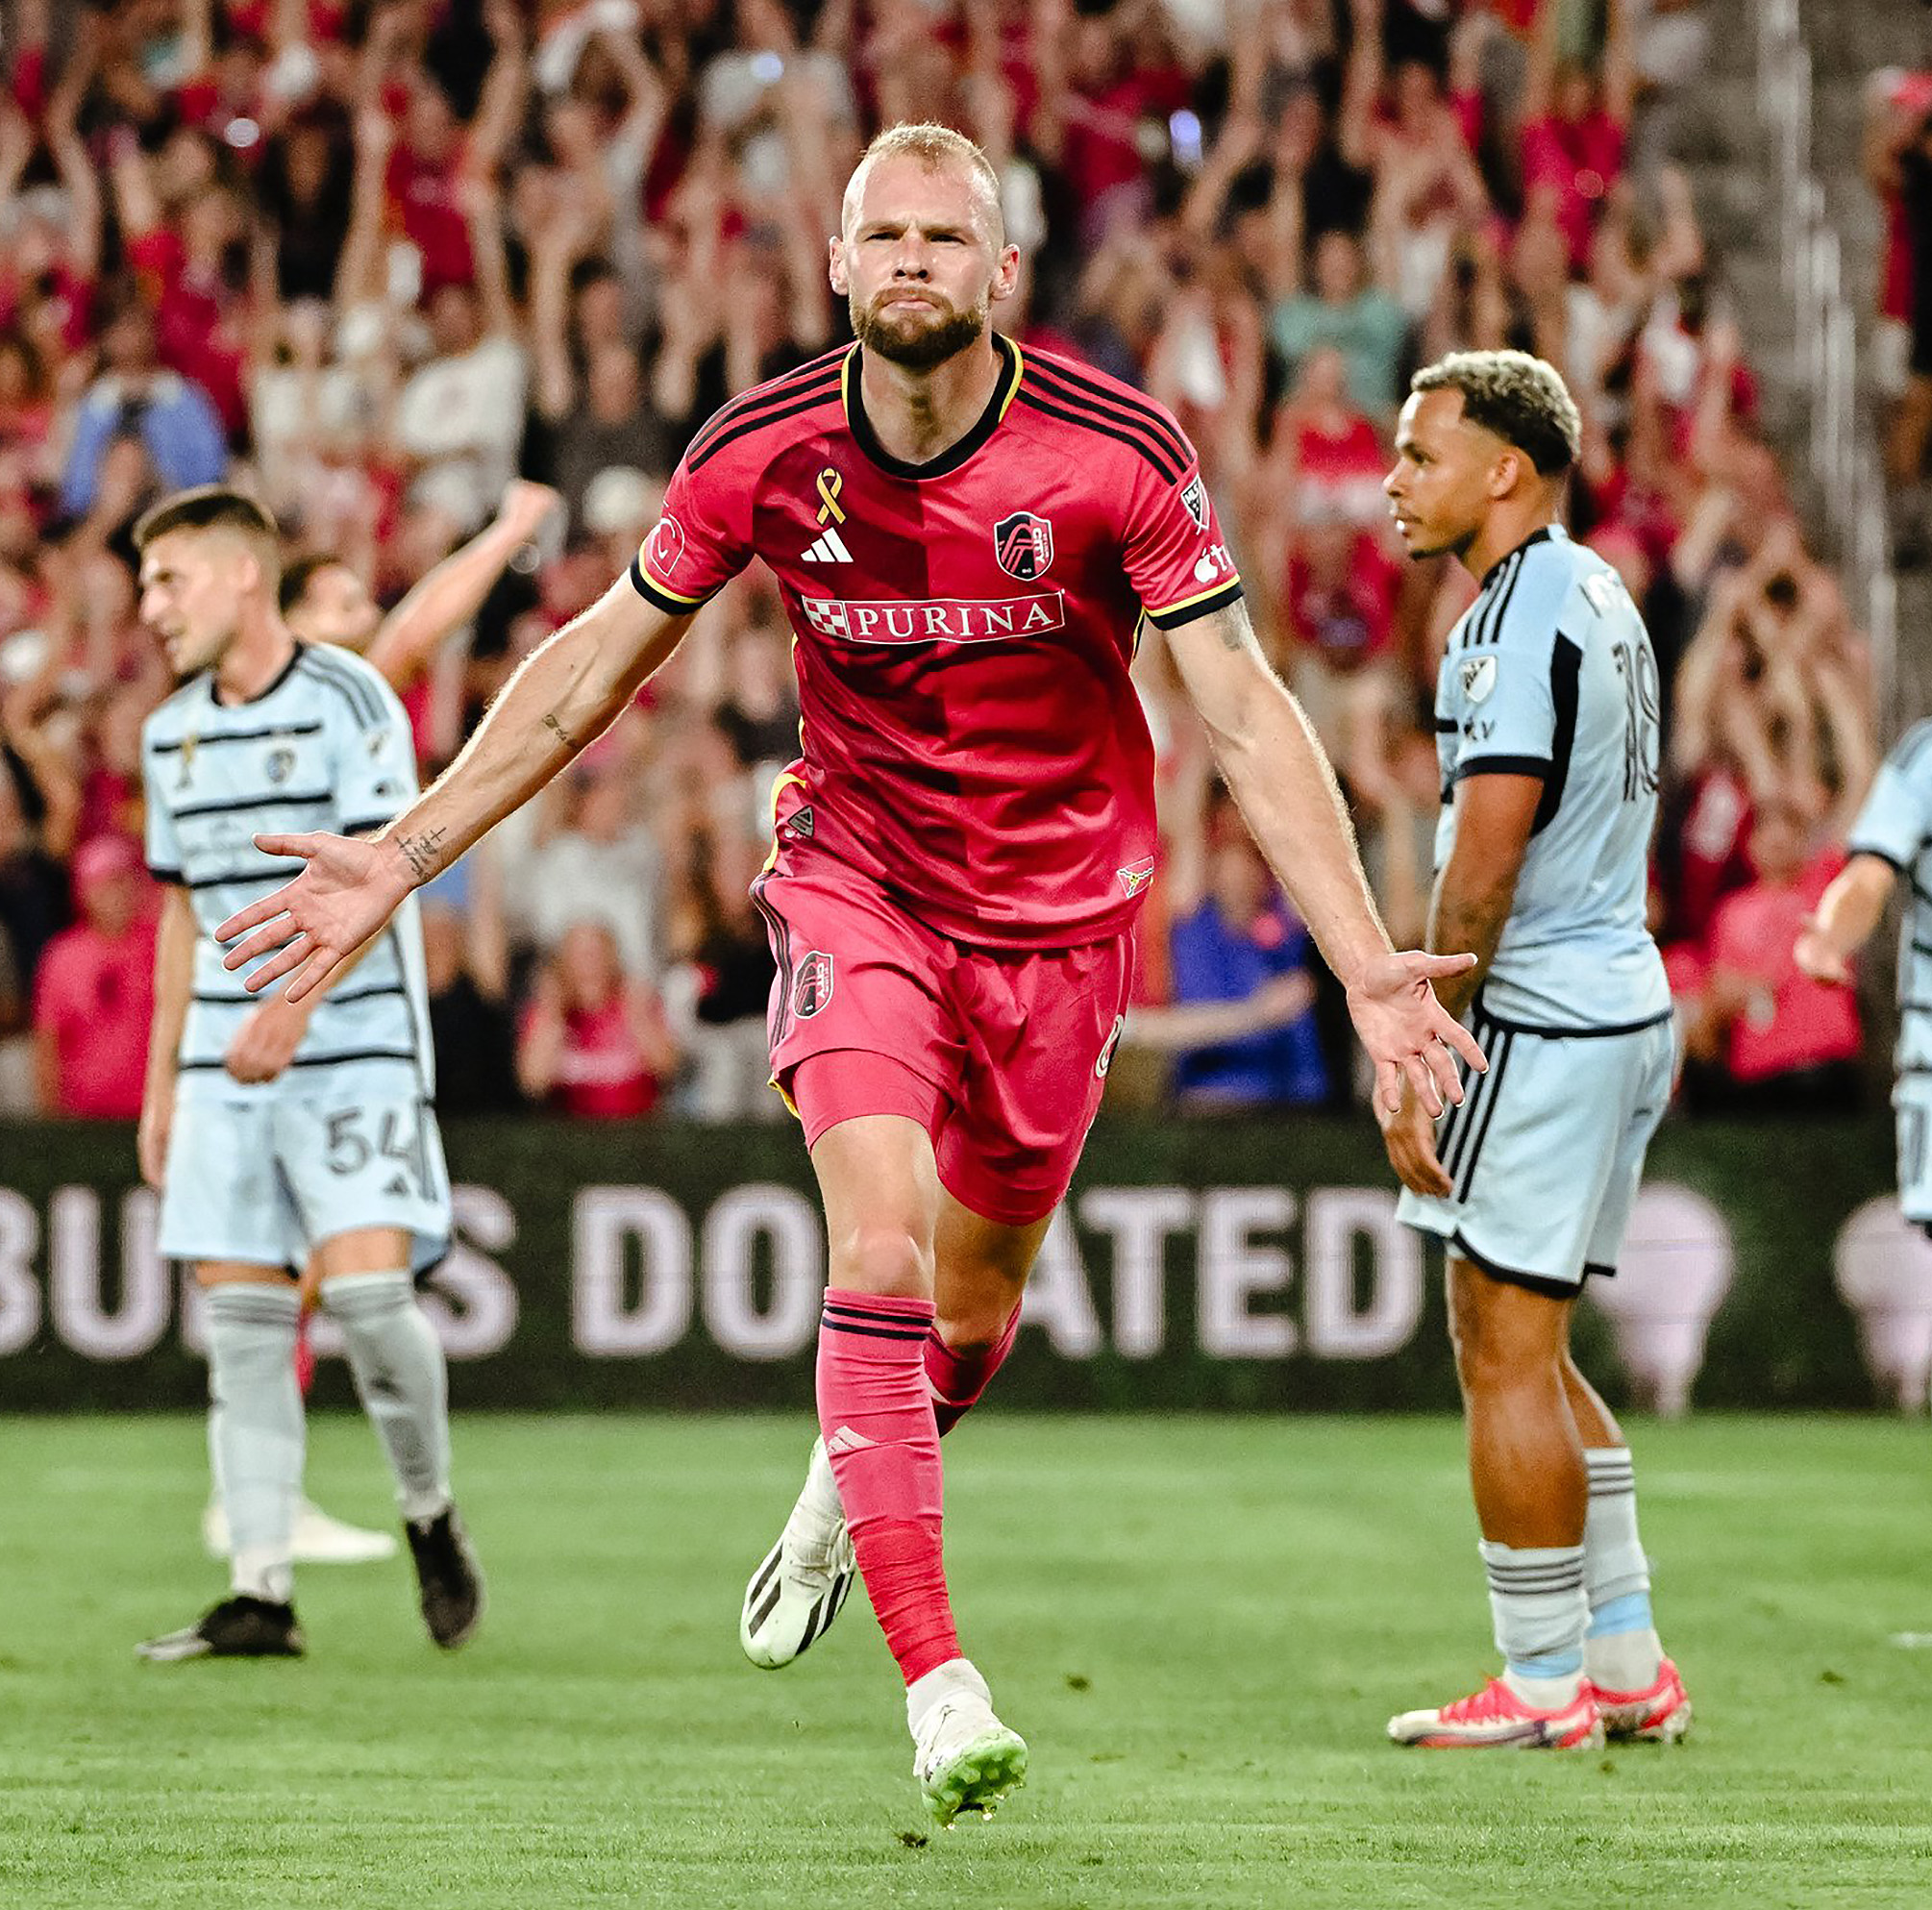 St. Louis City offense erupts in 4-0 win over Sporting Kansas City